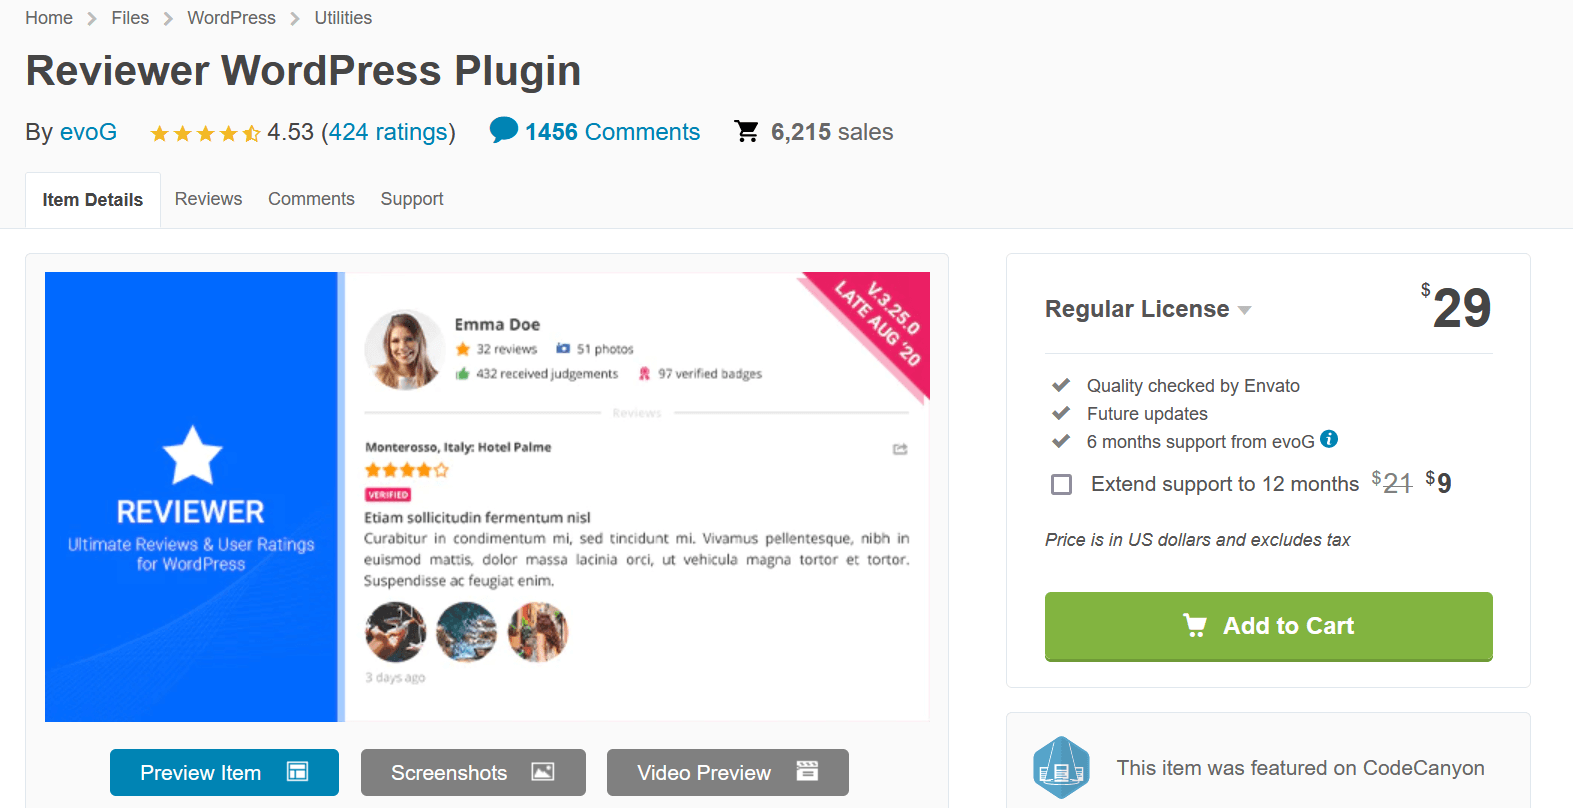 Reviewer WordPress plugin is a worthwhile premium plugin with many review features